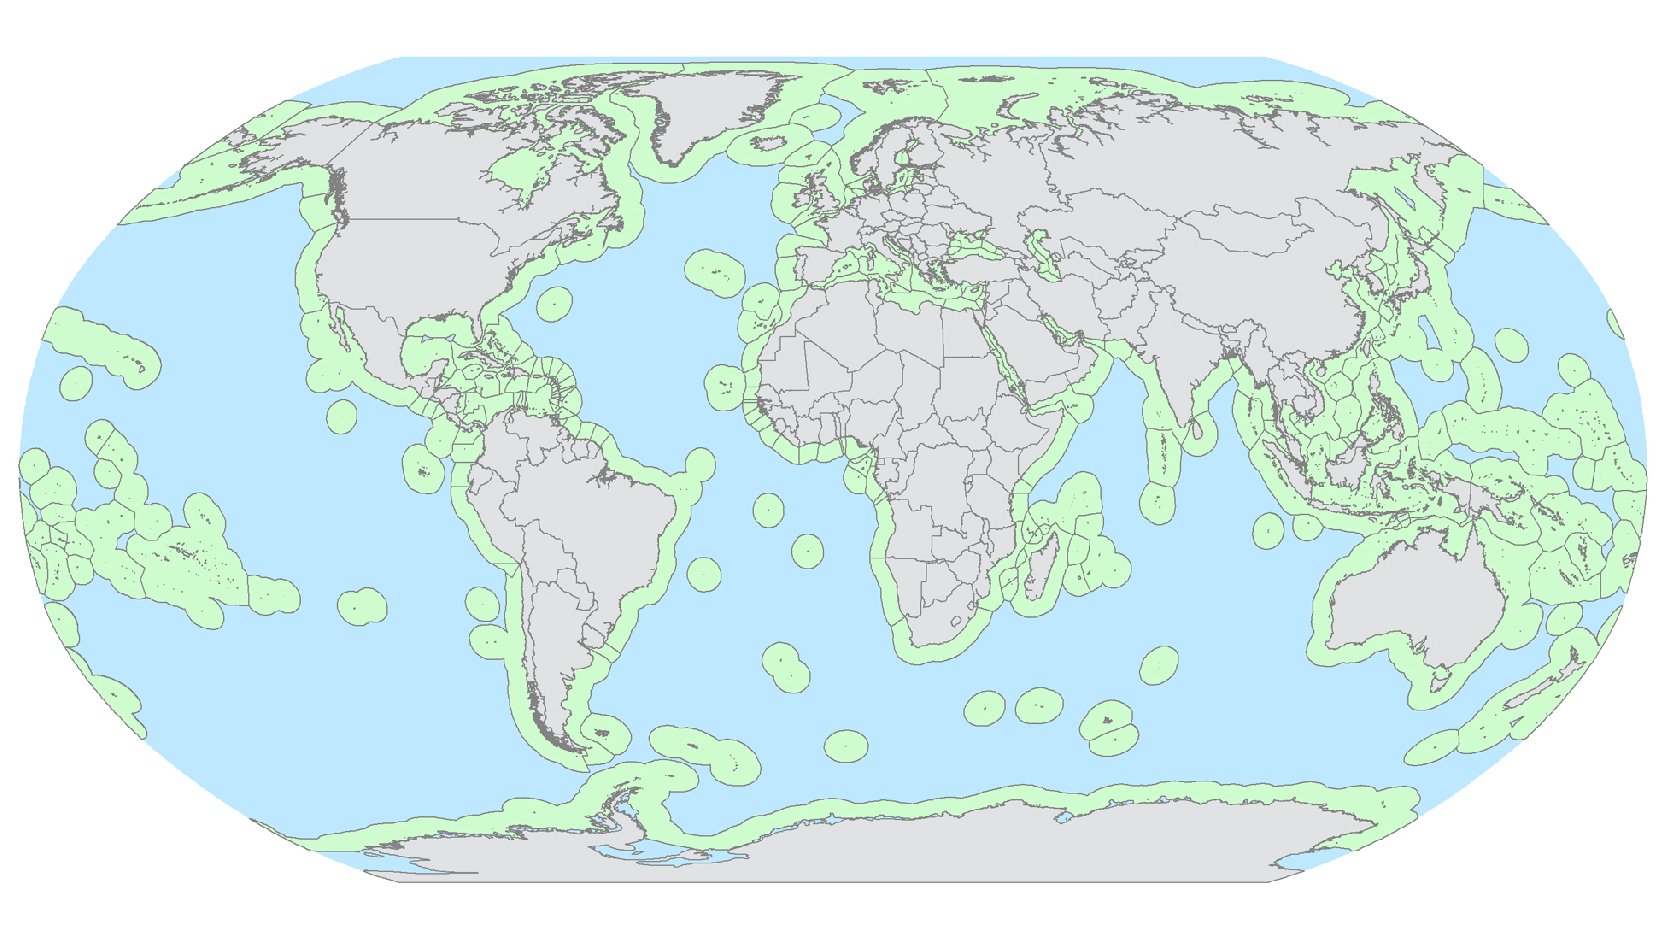 A global map of exclusive economic zones (green), where fishing would be allowed, and high seas (blue), where fishing would be banned, under the proposal from researchers Crow White and Christopher Costello. Image: PLoS Biology